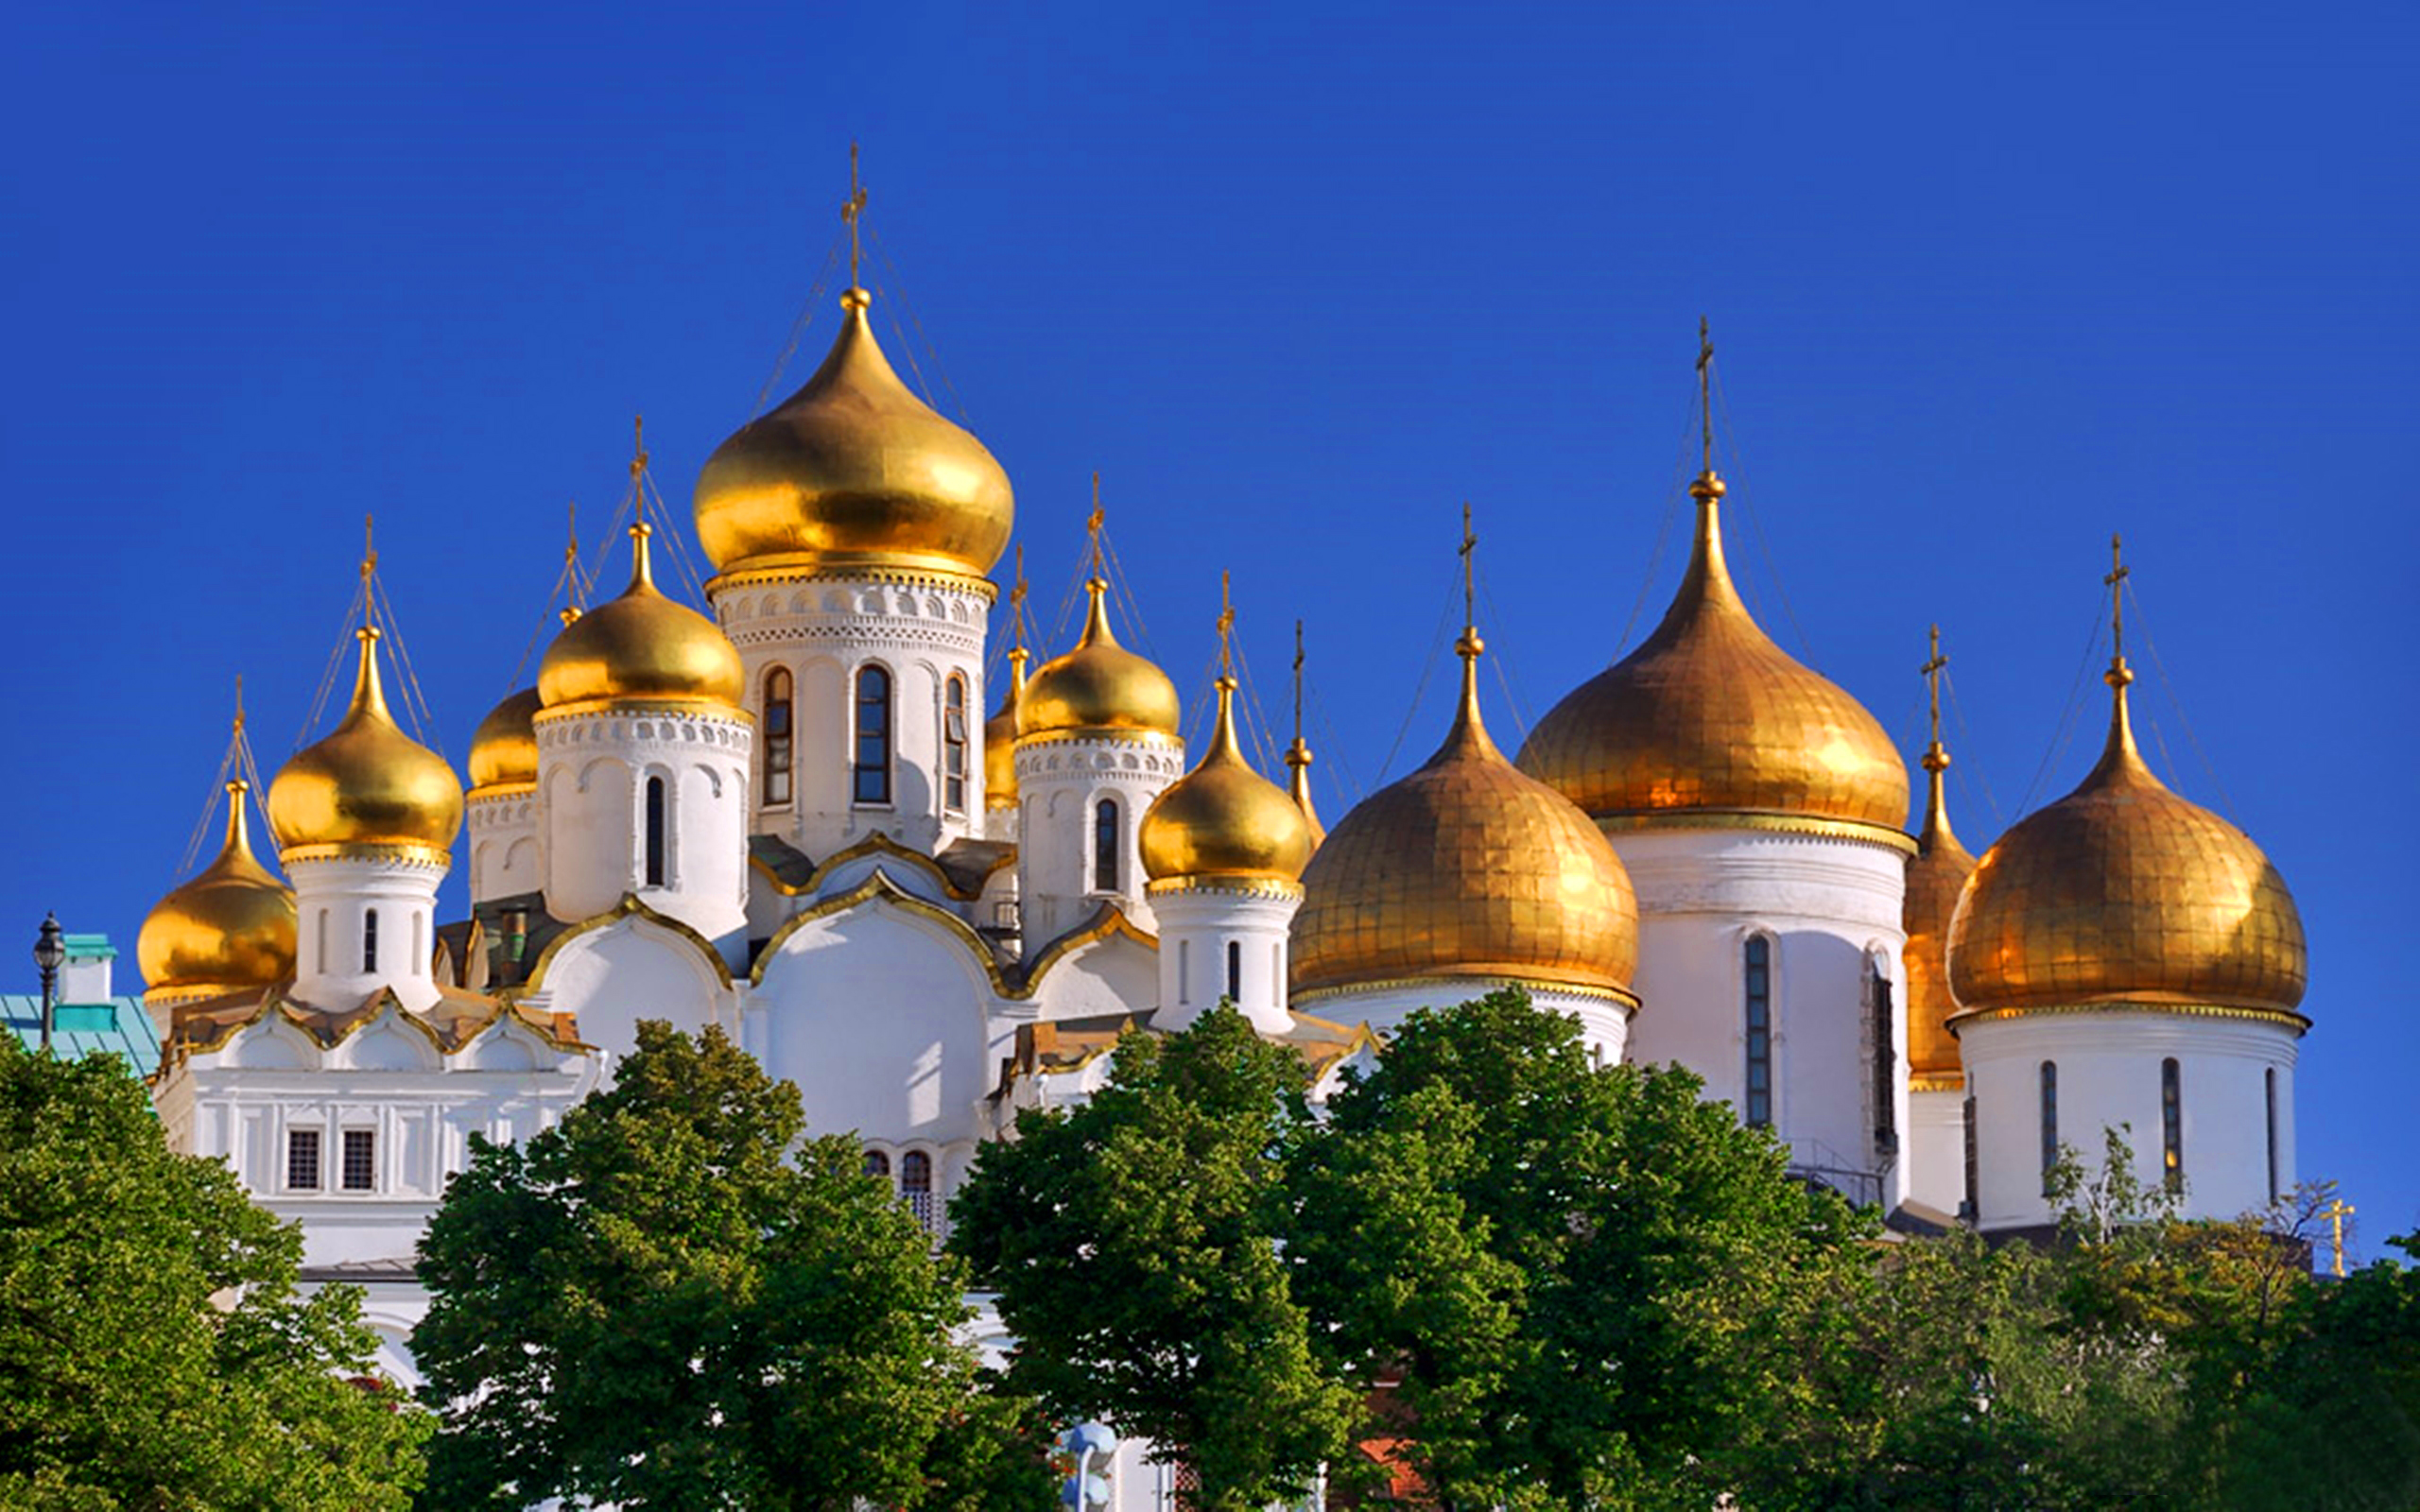 Golden Cupolas Of Moscow Kremlin Domes Of Russian Orthodox Churches 2014, Wallpaper13.com